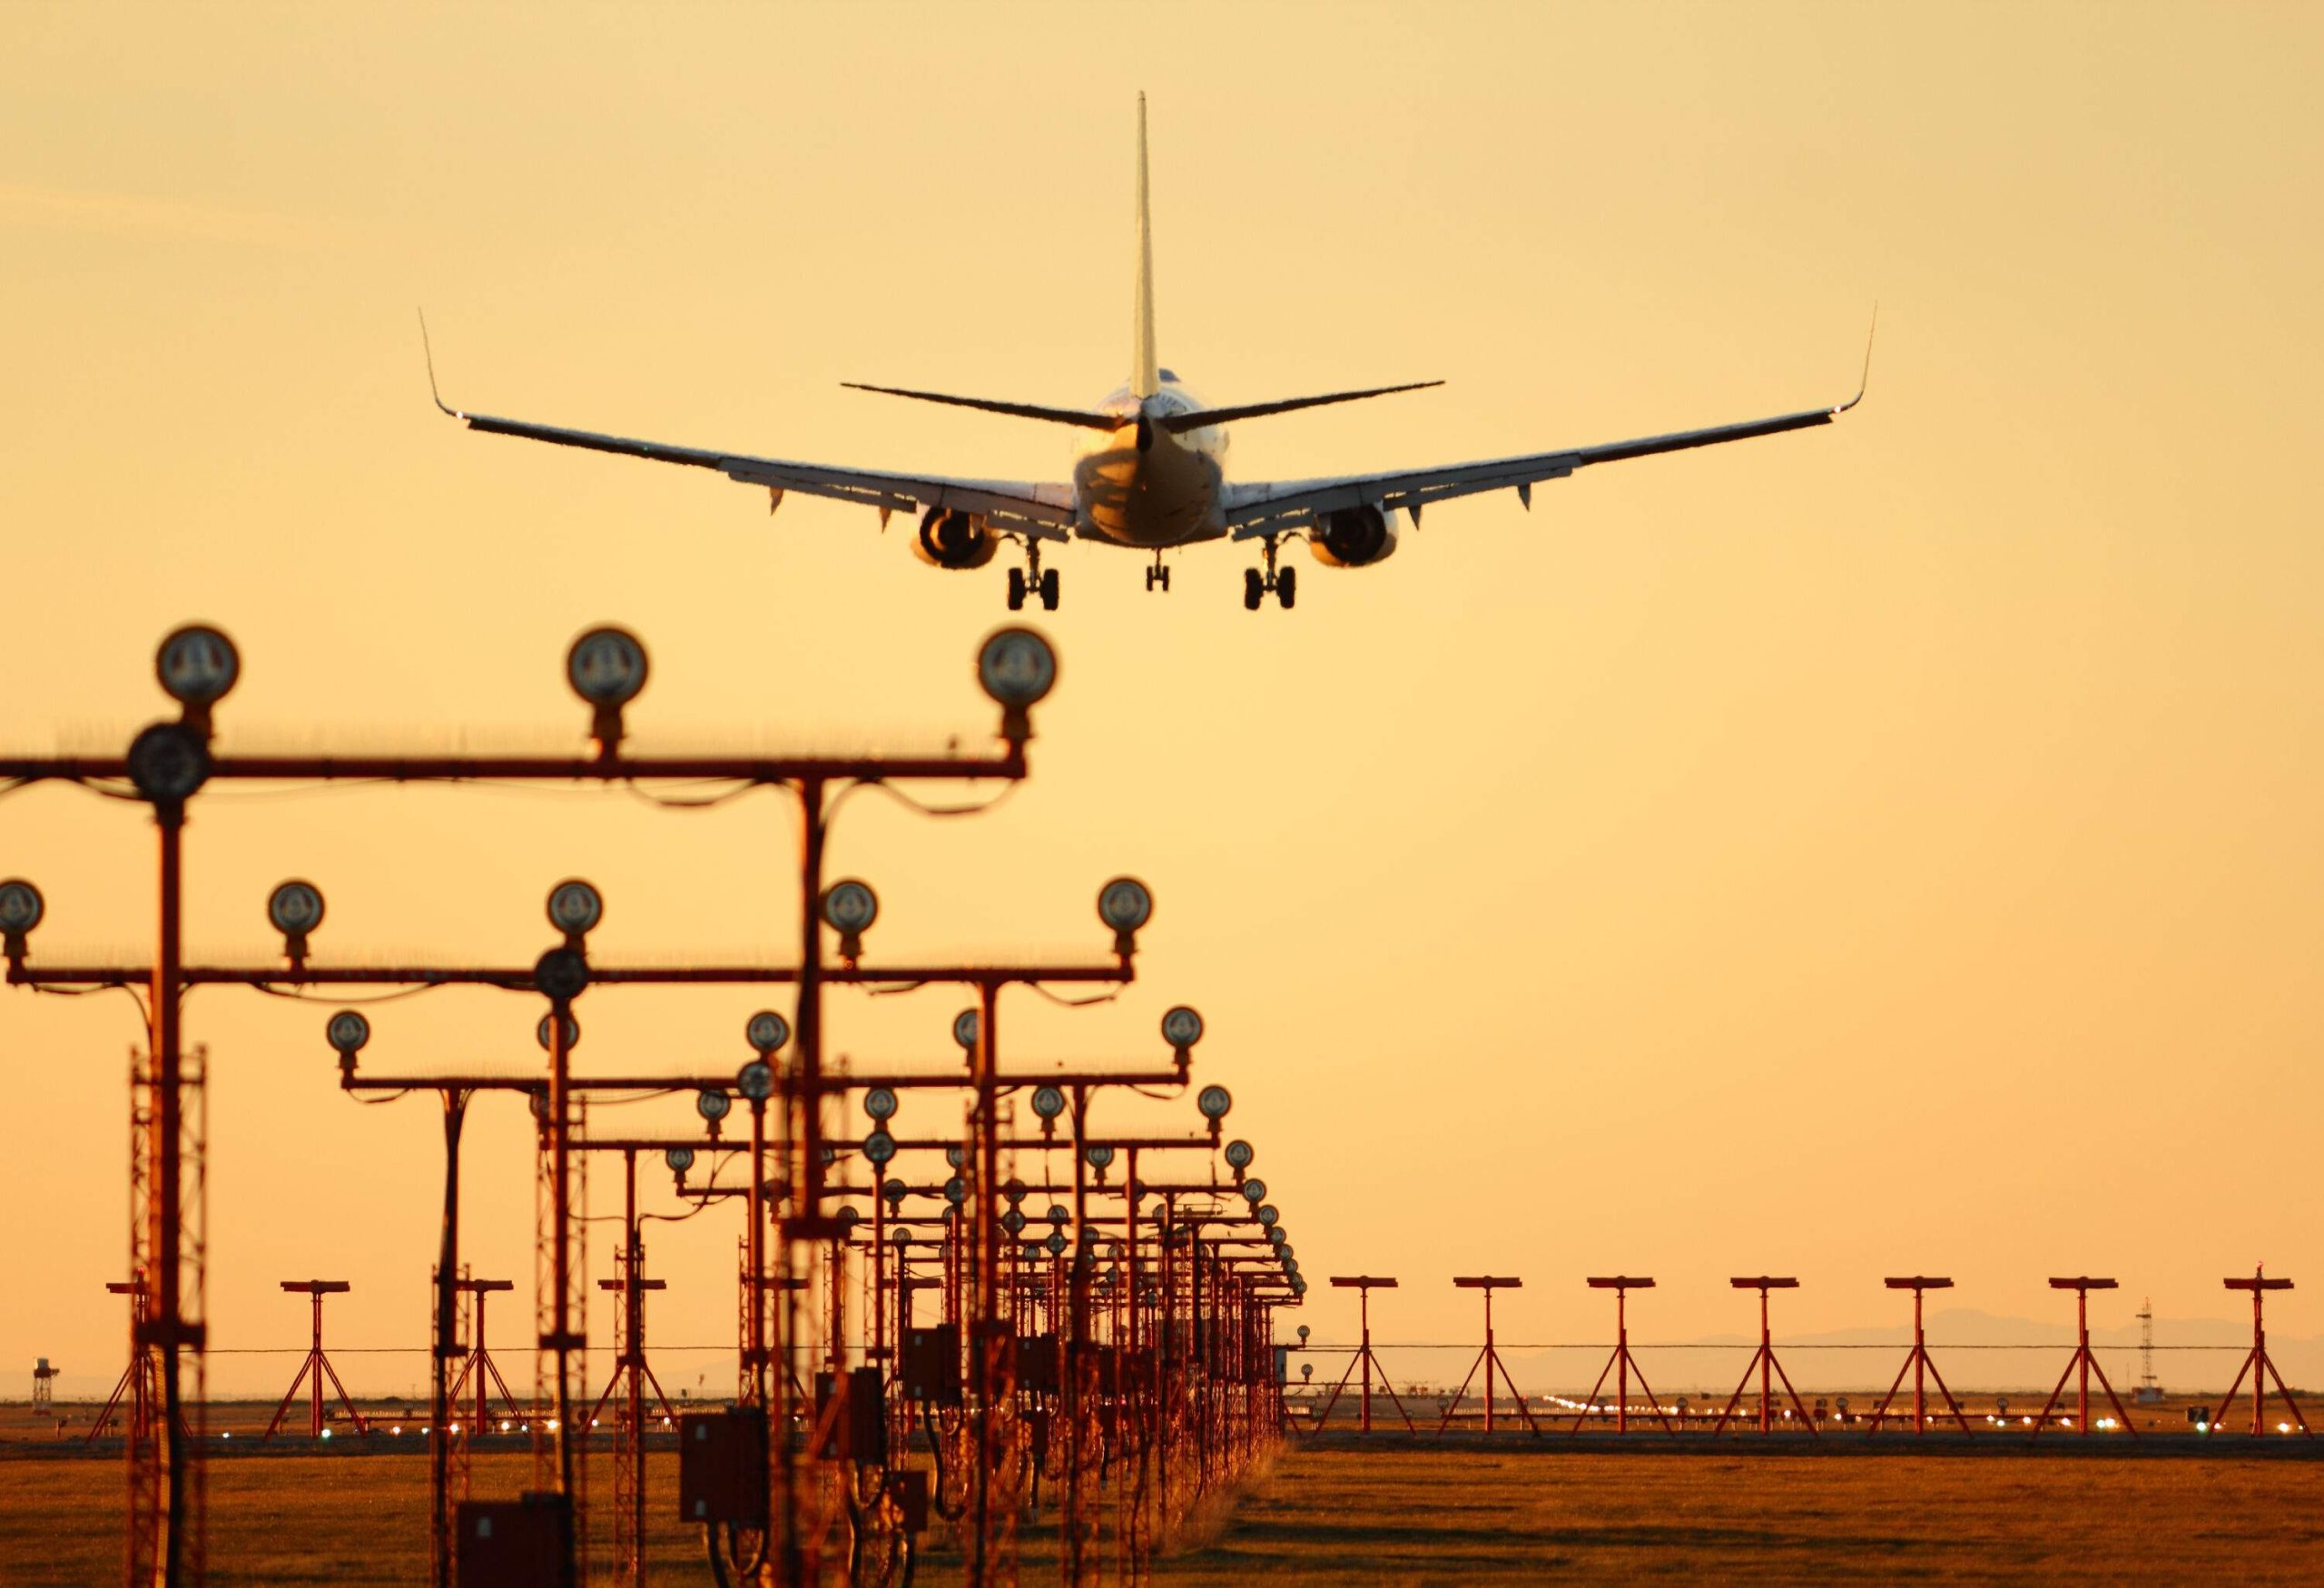 An airplane, landing gear extended, approaches a runway as the sun sets majestically, with vibrant runway markers guiding its descent in the foreground.